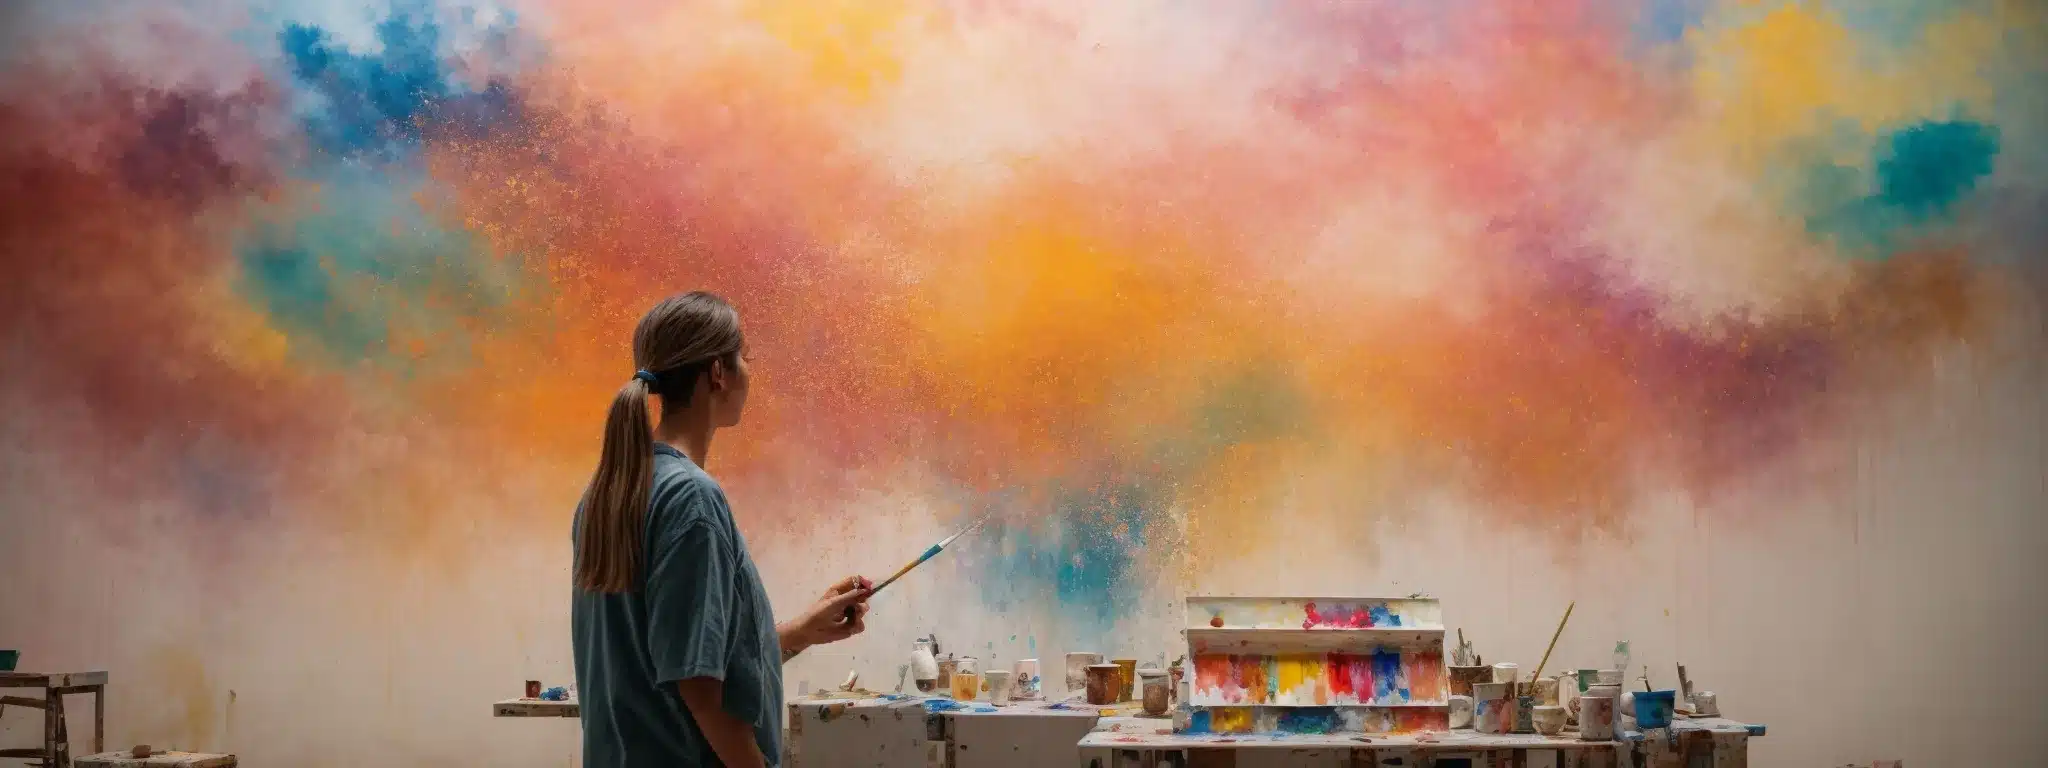 An Artist Thoughtfully Daubs Paint Onto A Wide, Mural-Sized Canvas In A Brightly Lit Studio, Surrounded By A Palette Of Colors.